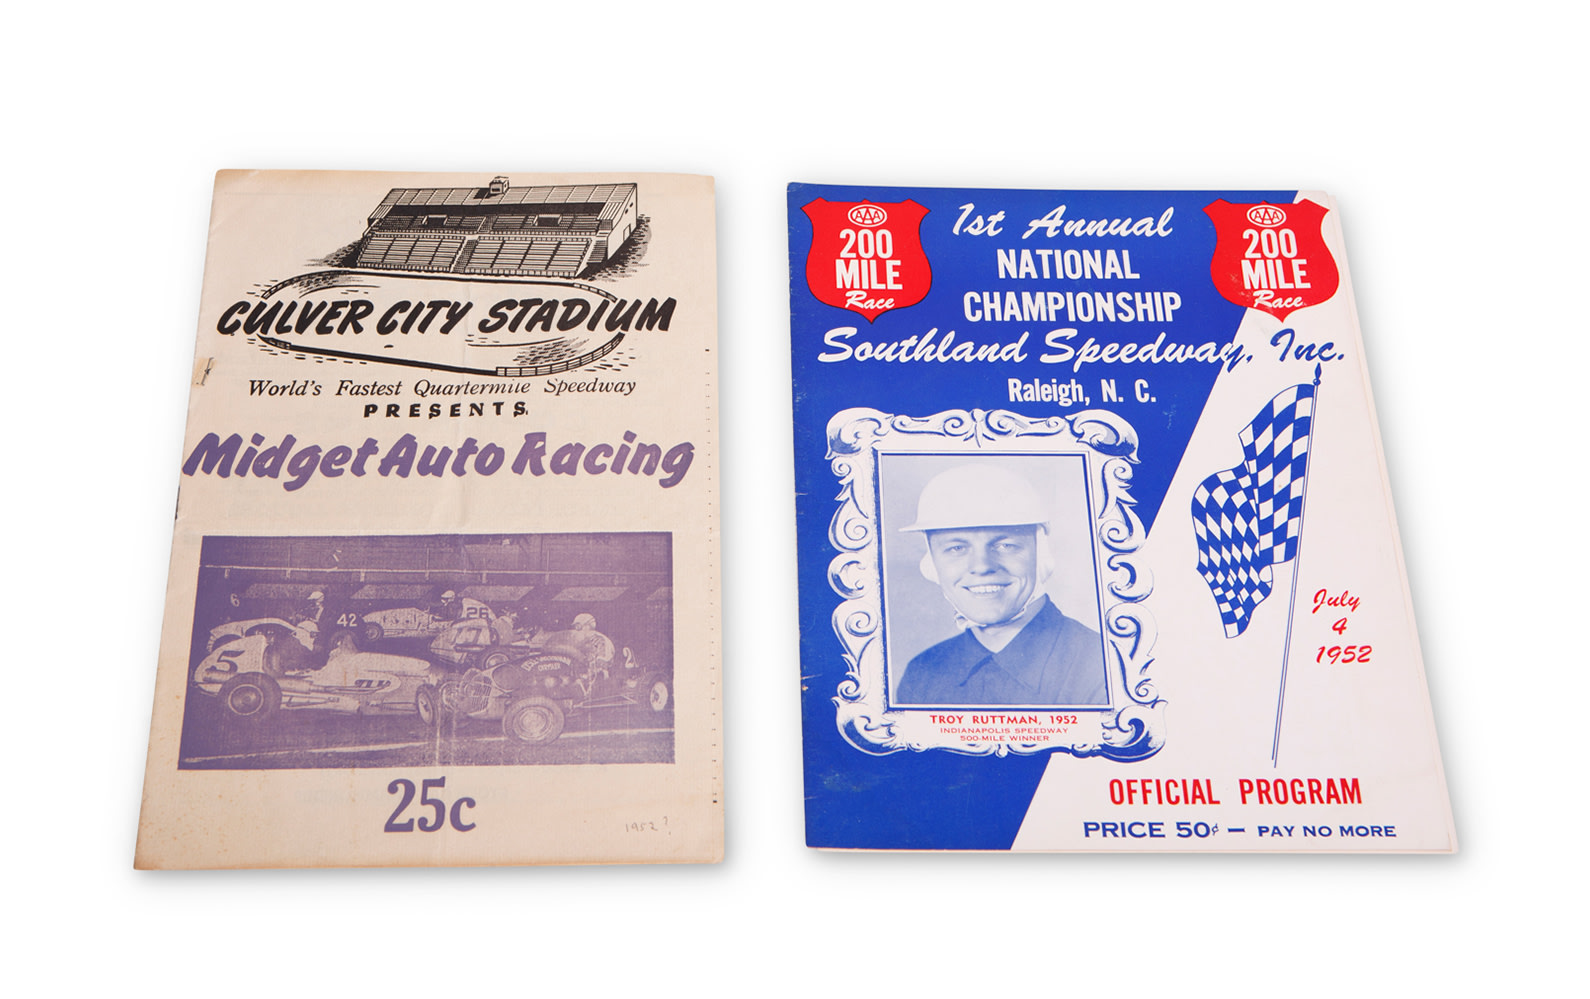 Southland Speedway and Culver City Stadium Race Programs, c. 1952